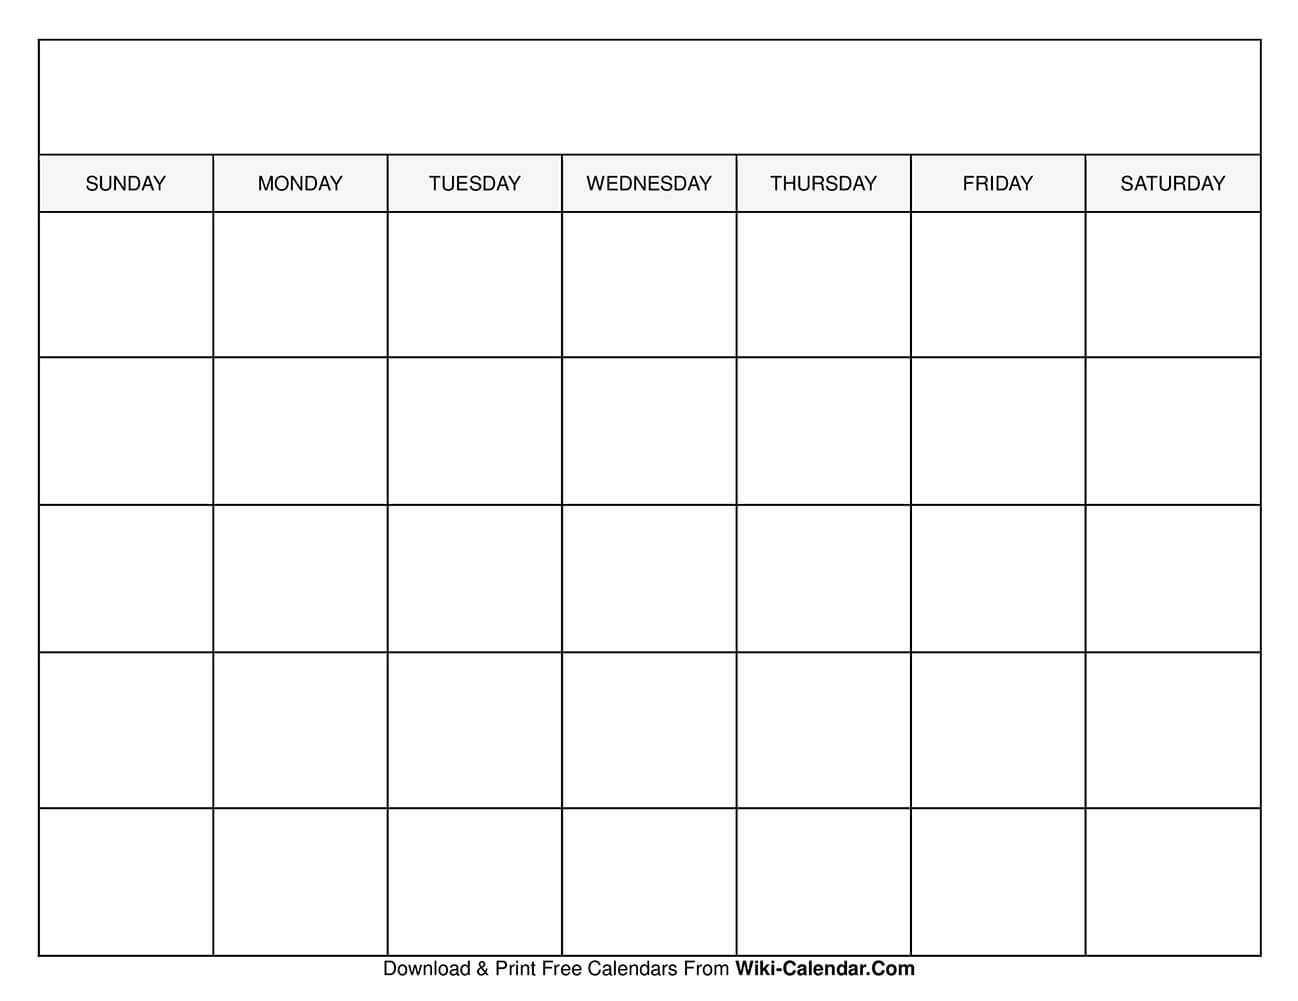 Featured image of post Wiki Calendar Free Printable 2021 Calendar With Holidays Pdf : Great printable calendar to note your schedule, or make a holiday printable july calendar templates.